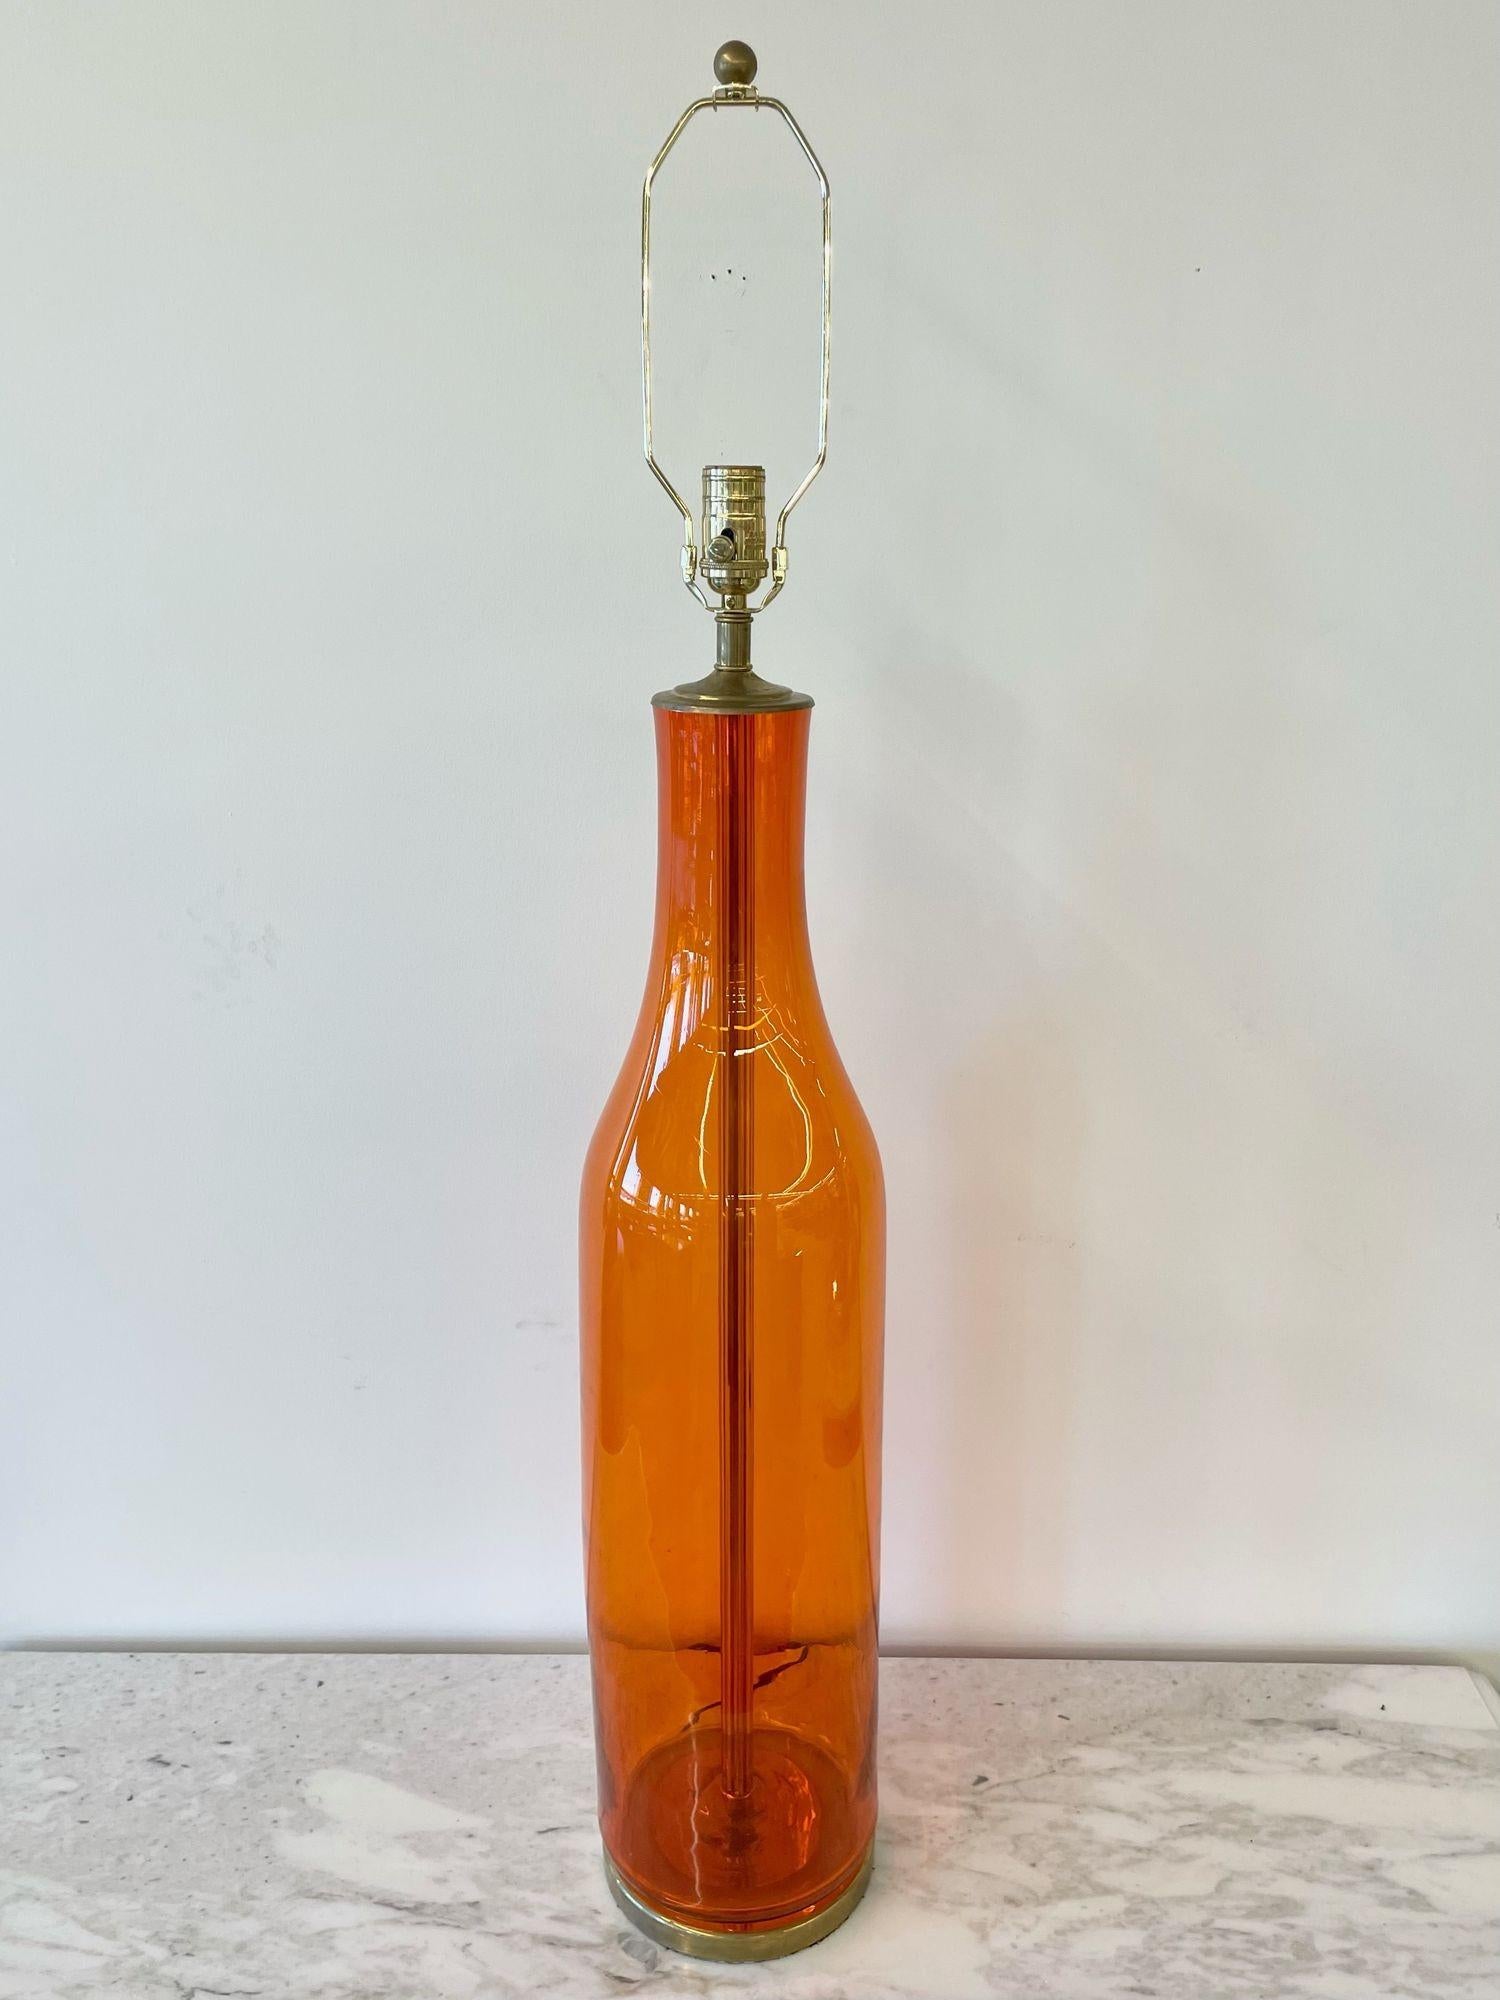 Single midcentury large orange blown glass bottle shape table lamp by Blenko
 
Blenko Large Orange Glass Lamp with Brass Hardware. Not sold with shade. 
 
Hand Blown Glass, Brass
United States, 1960s
 
44H x & 7Dia. Total
36H x & 7 Dia. (to